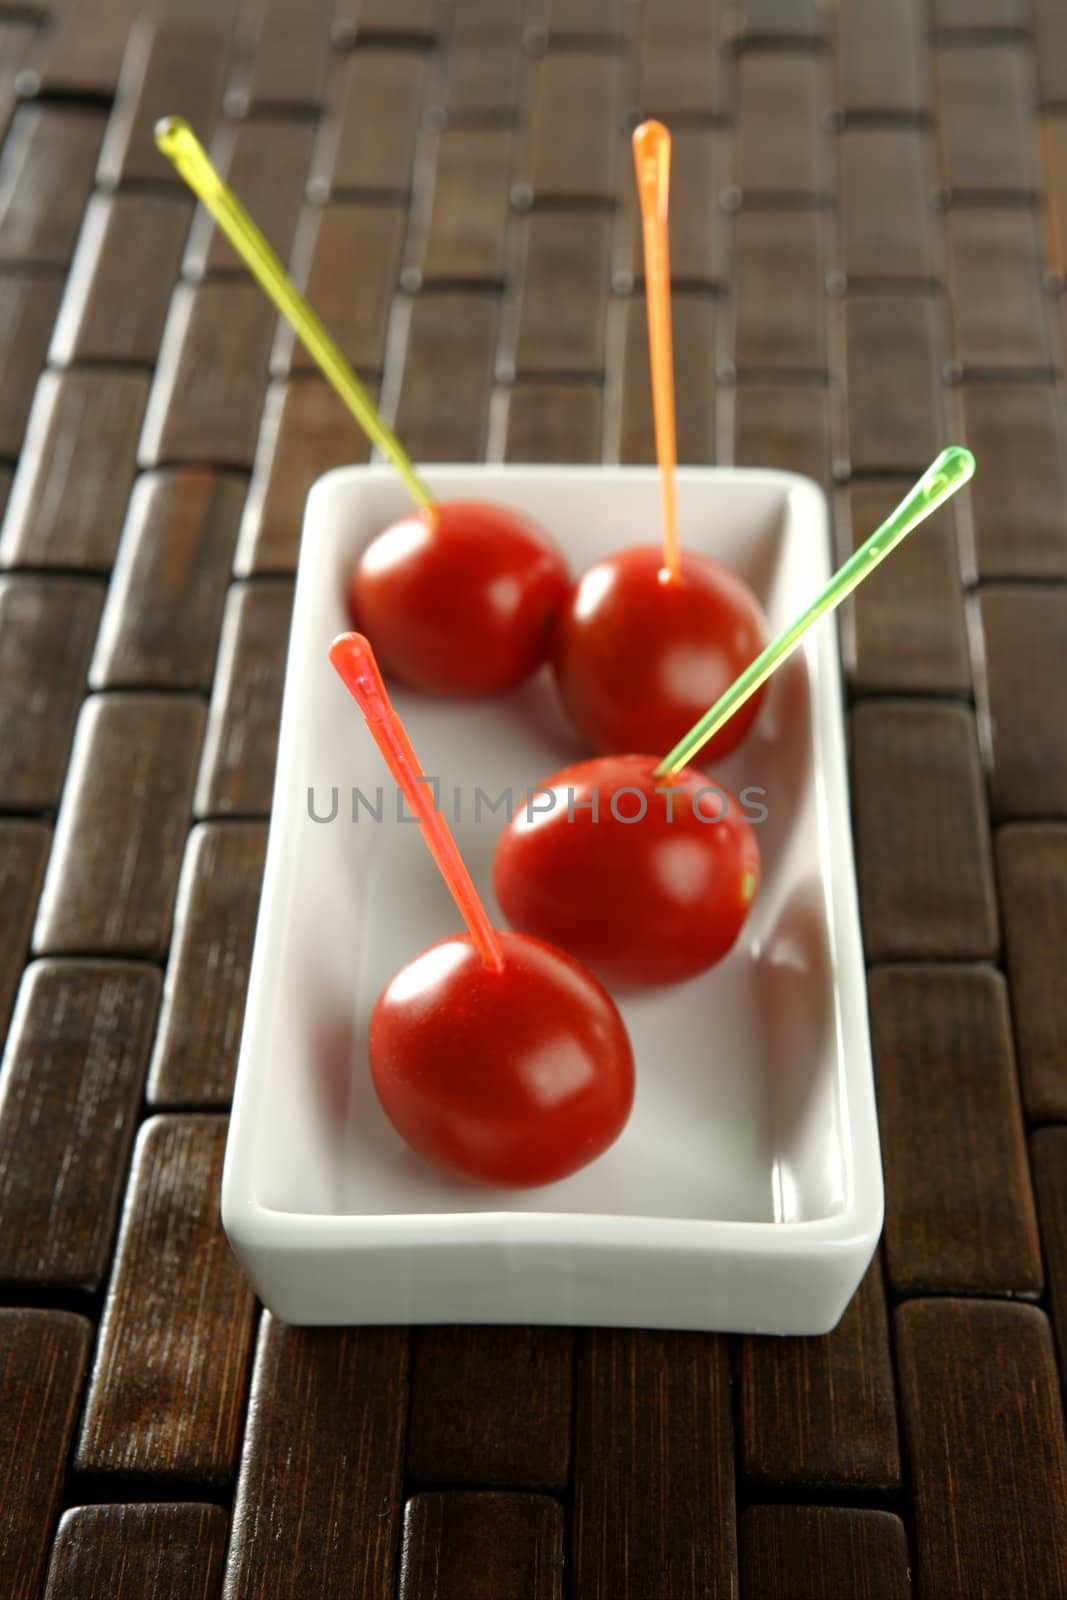 Tomatoes snack and colored sticks by lunamarina